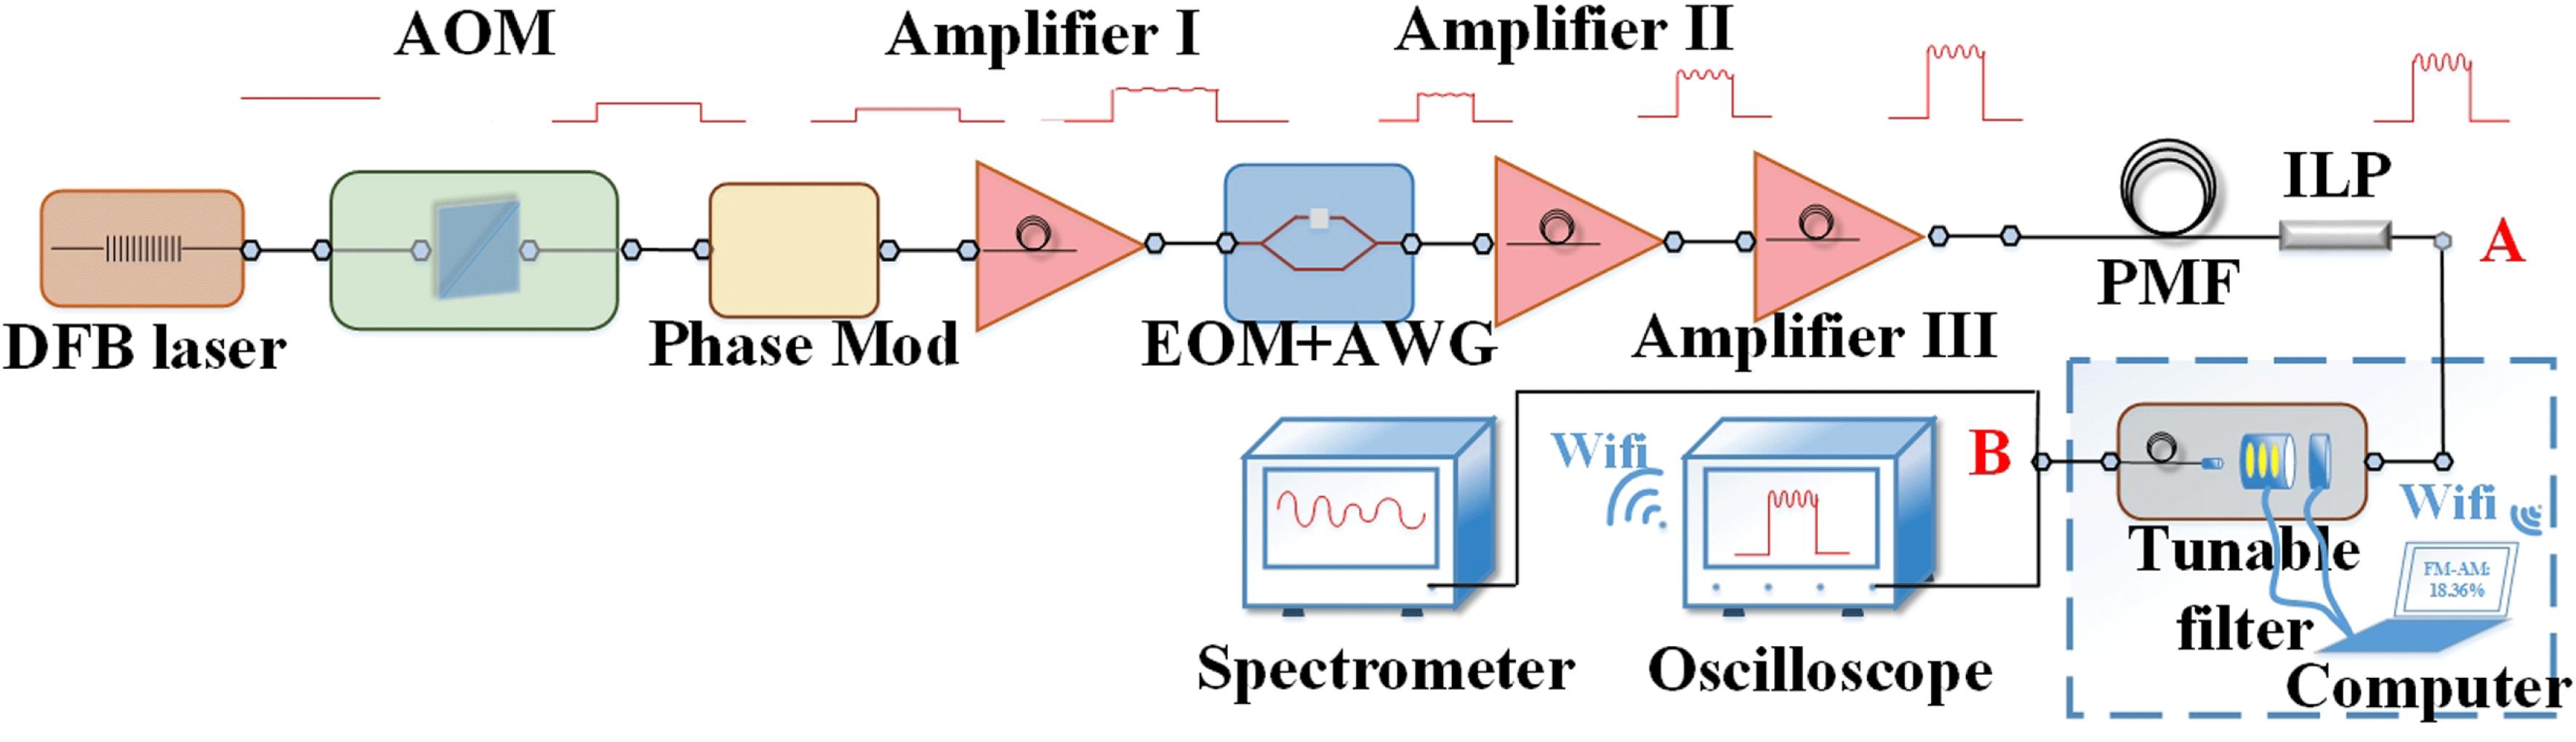 Schematic of the polarization-maintaining (PM) front end. DFB laser: distributed feedback laser, AOM: acoustic-optic modulator, Phase Mod: phase modulator, EOM: electro-optic modulator, AWG: arbitrary wave generator, PMF: polarization-maintaining fiber, ILP: inline polarizer. The red pulses present the evolution of temporal profile, which considers the effect of loss, amplification and frequency modulation (FM) to amplitude modulation (AM).